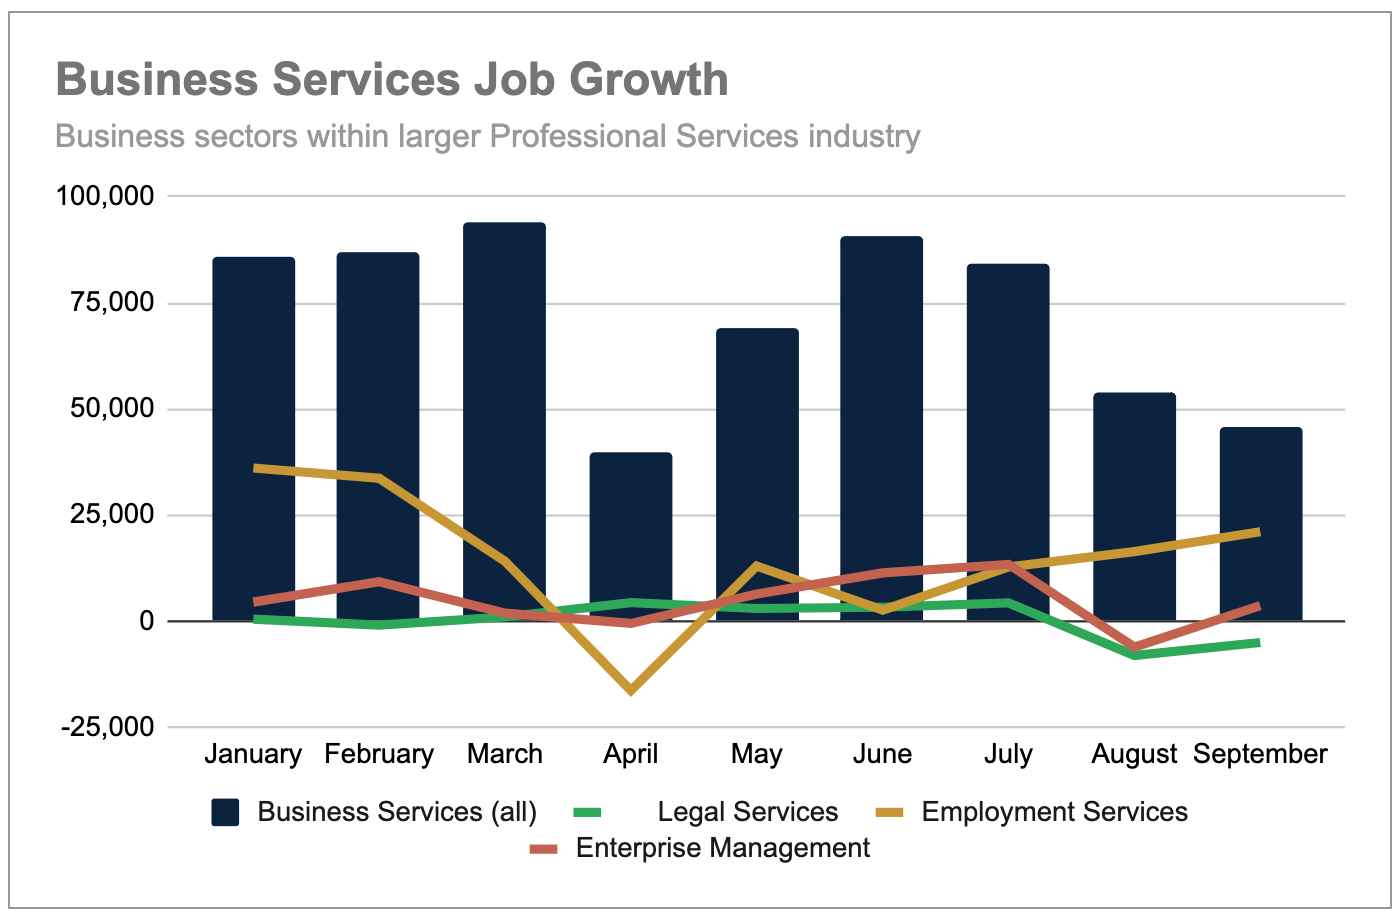 Business services job growth, business sectors within the larger professional services industry